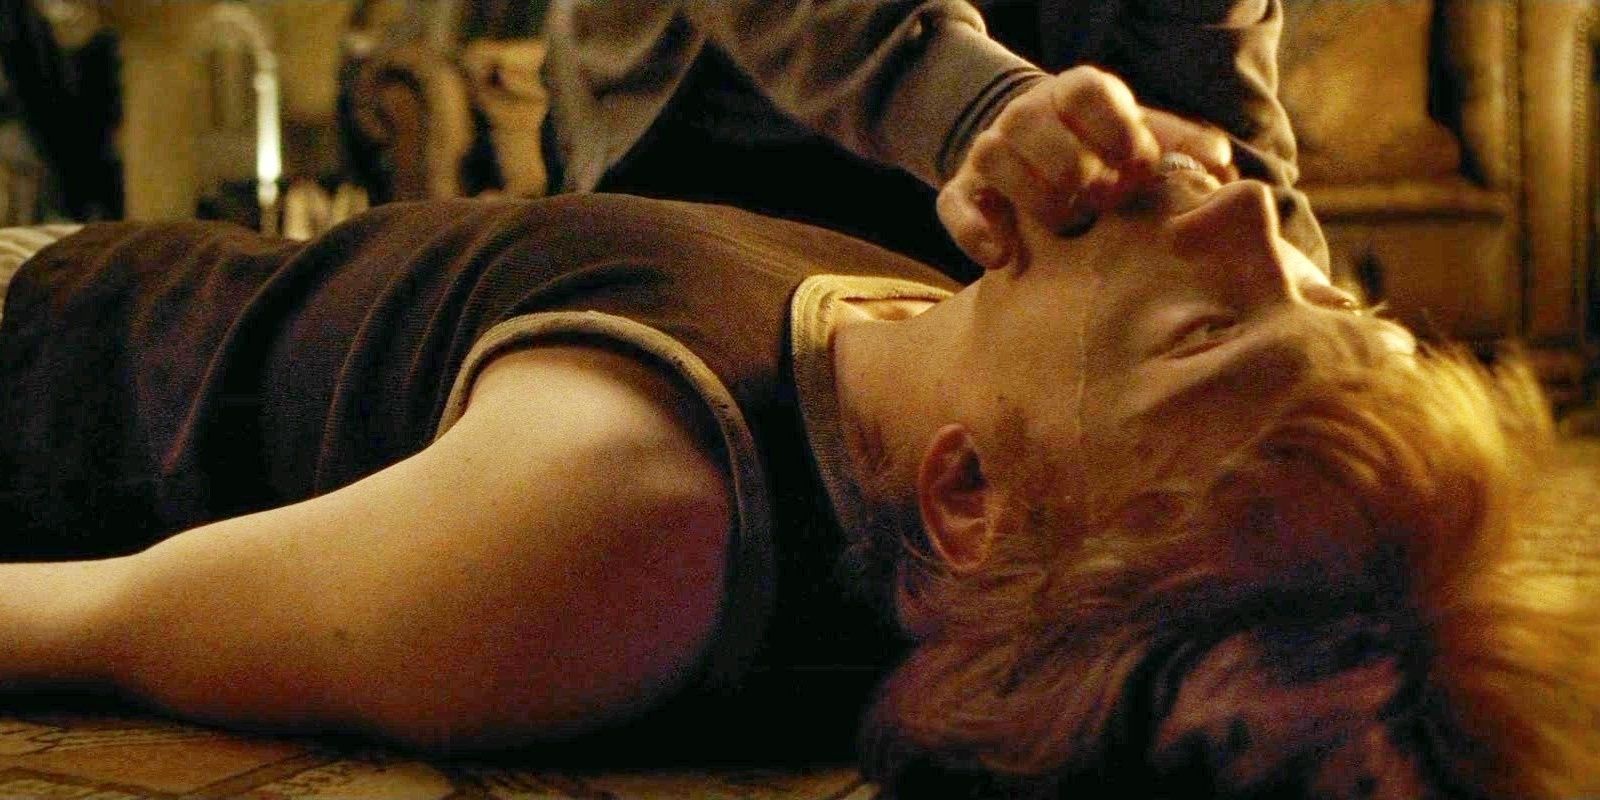 Harry Tries to Resuscitate Ron